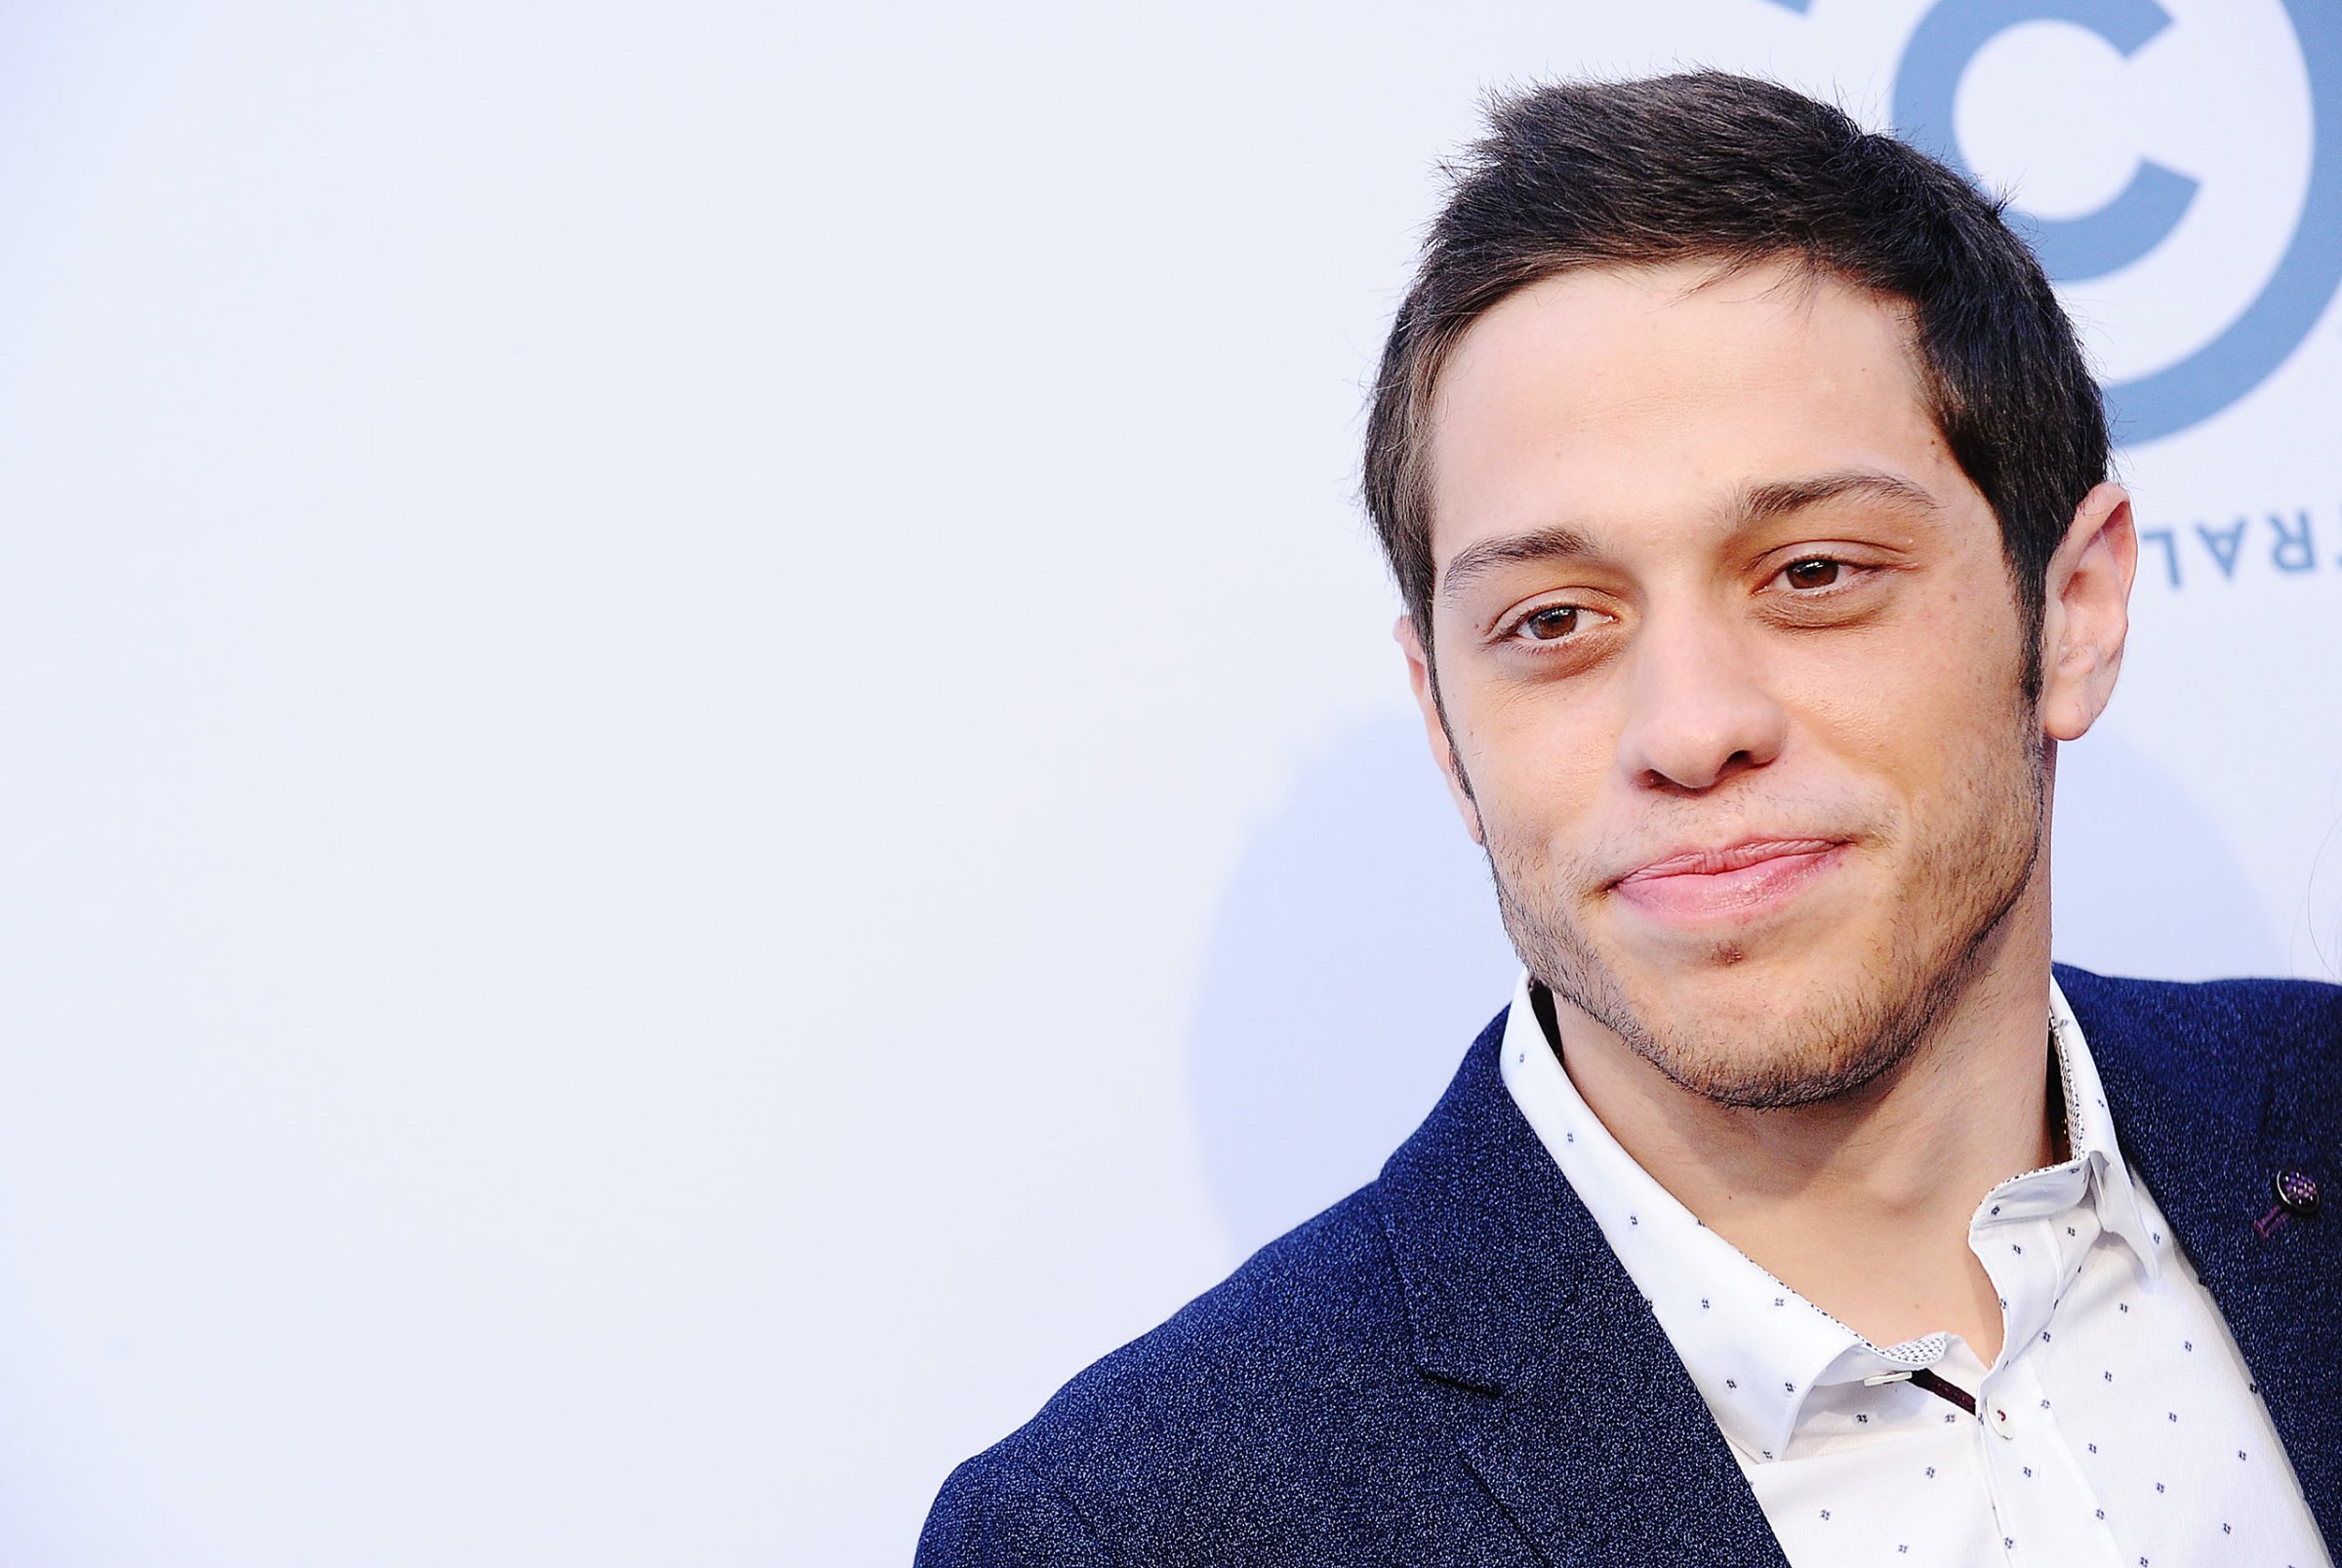 Pete Davidson attends the Comedy Central Roast of Rob Lowe at Sony Studios in Los Angeles on Aug. 27, 2016.